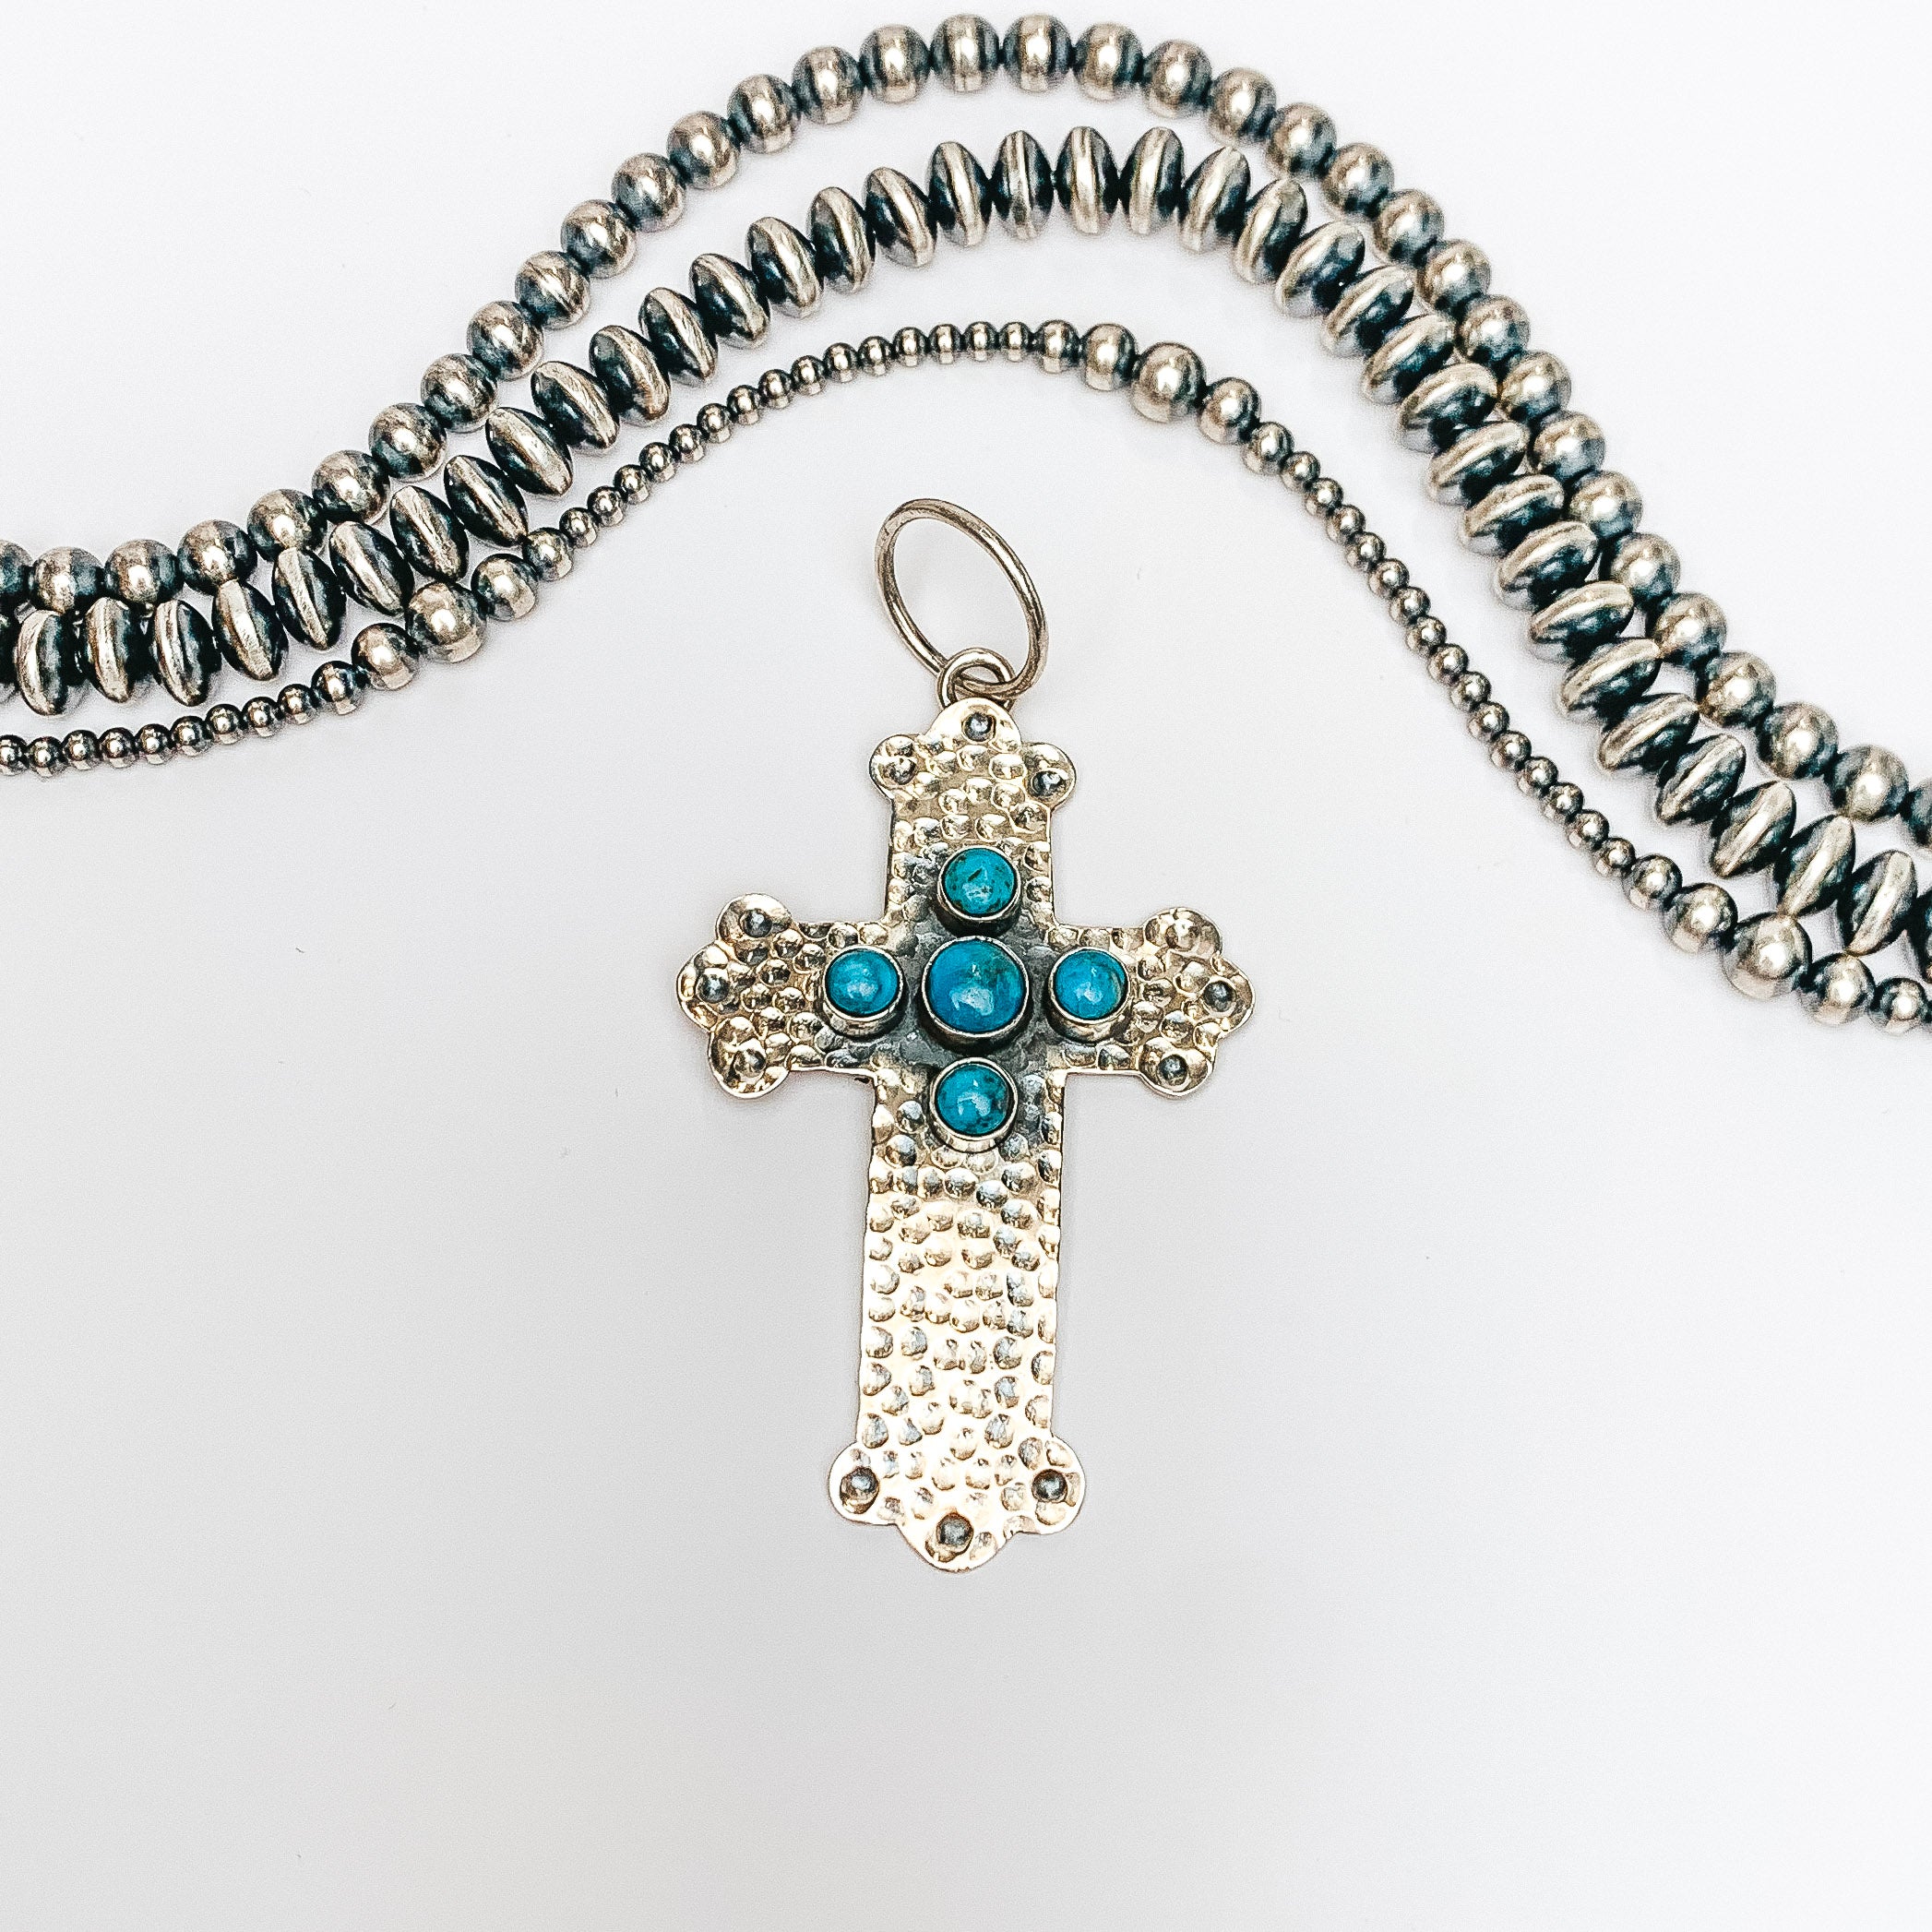 Centered in the picture is a hammered pattern cross pendant with 5 kingman turquoise stones. Navajo pearls are laid above the cross, all on a white background.